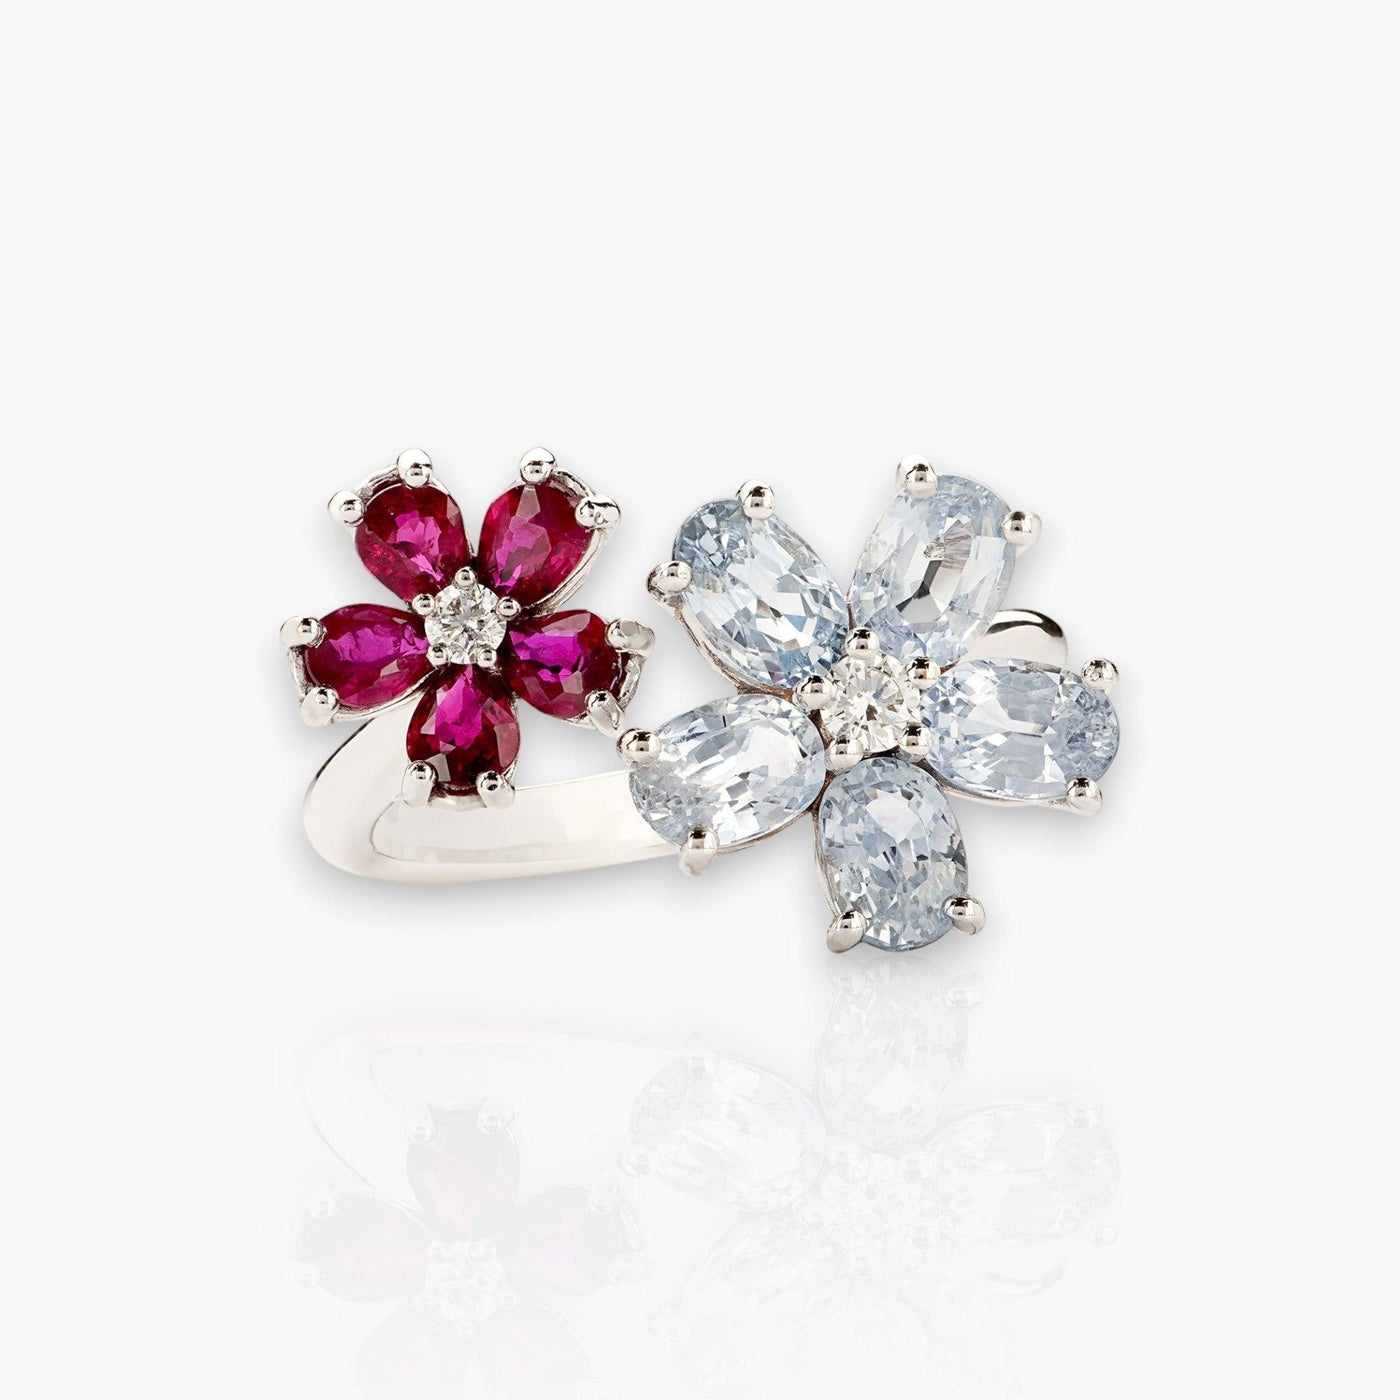 Ring Two Flowers, White Gold, Rubies And Diamonds - Moregola Fine Jewelry